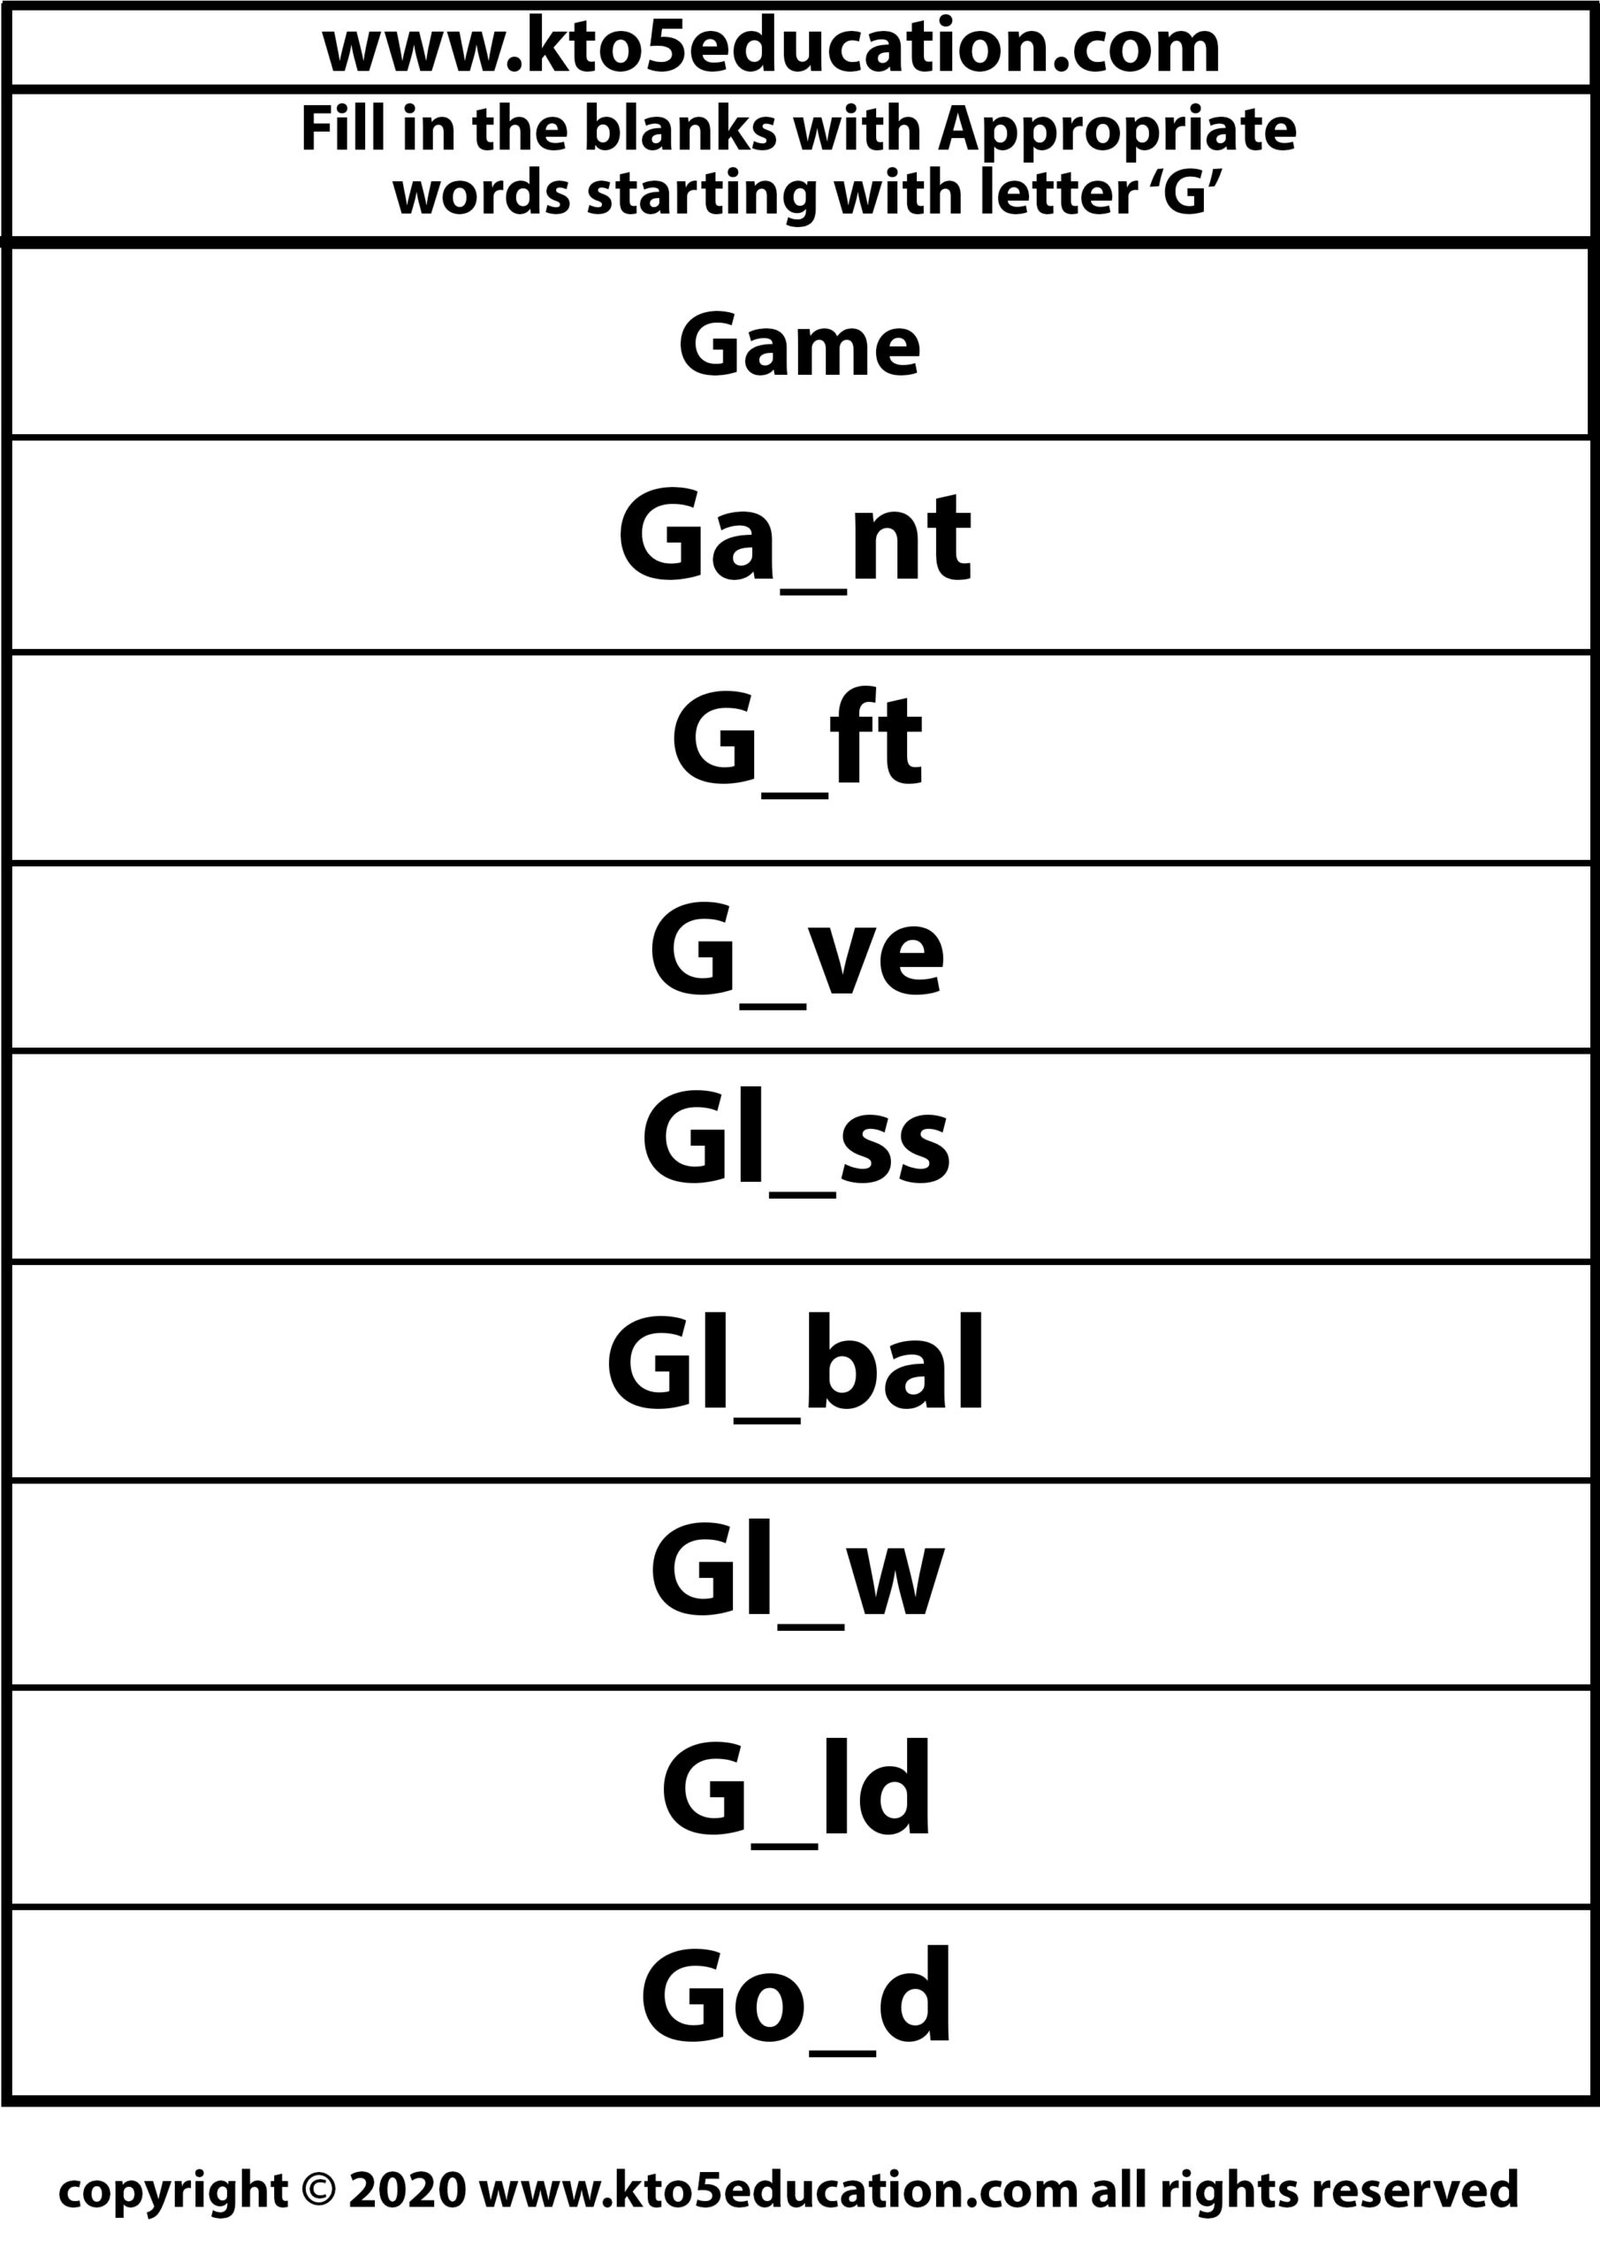 Fill in the Blanks With Appropriate Words Starting with Latter G Worksheets 2